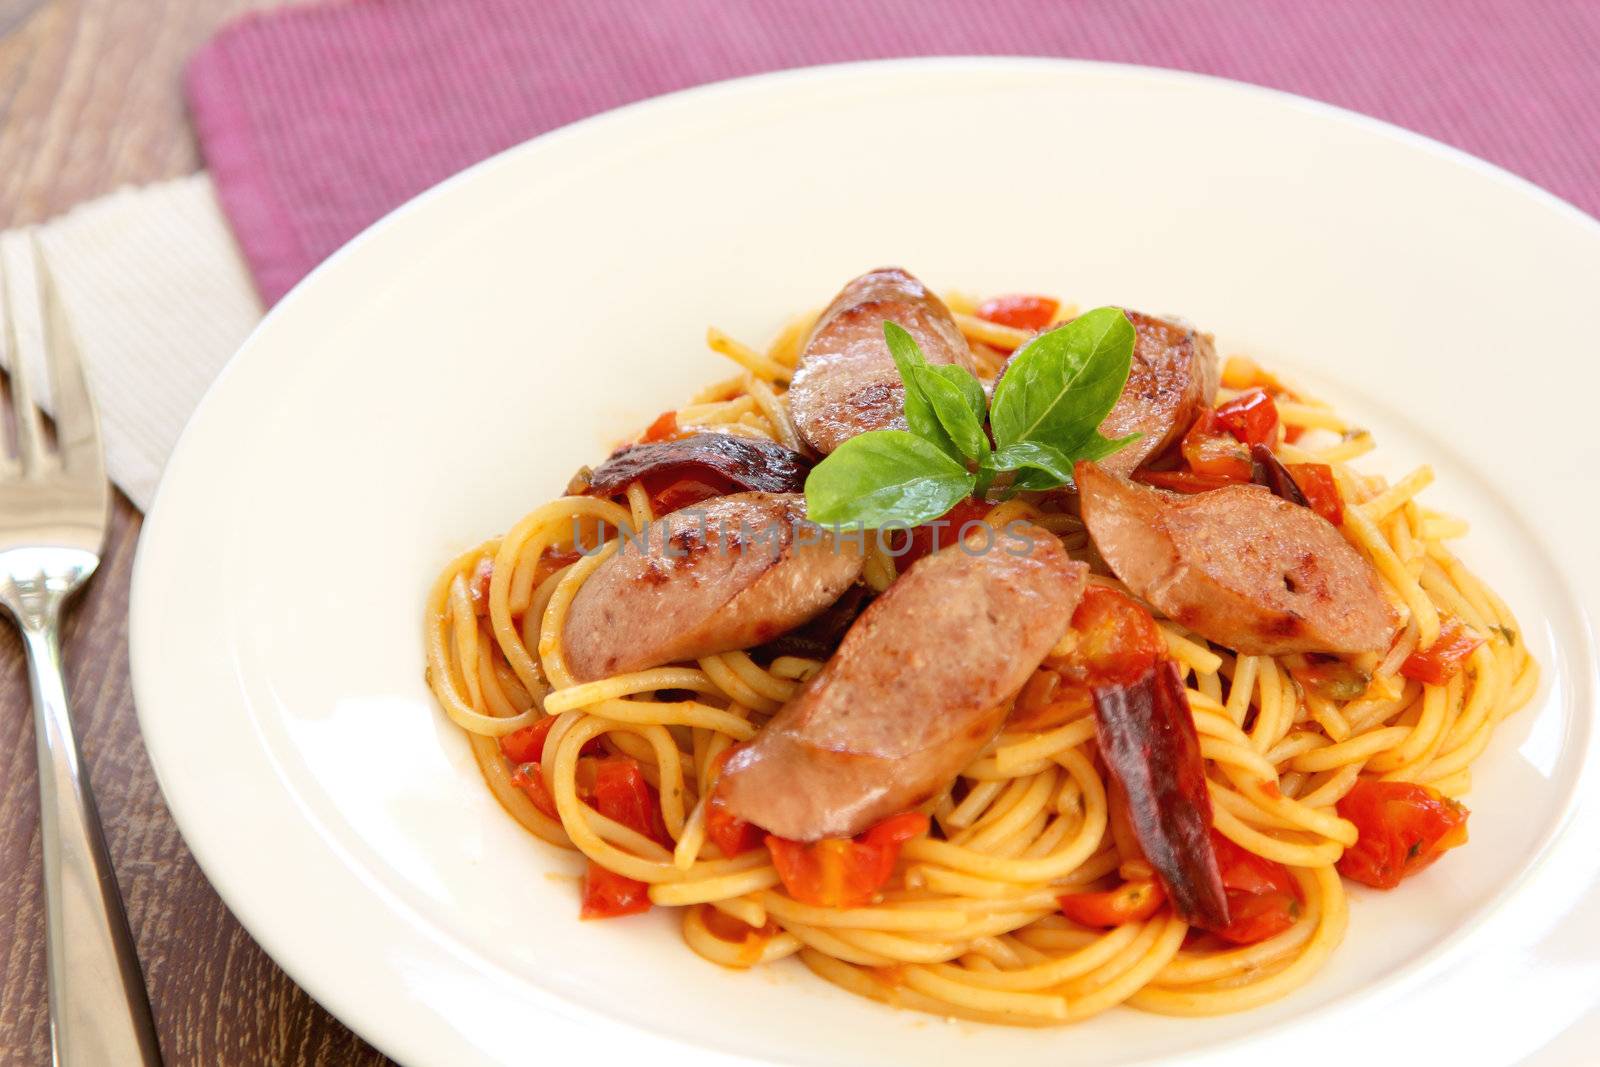 Spaghetti with sausage and tomato by vanillaechoes